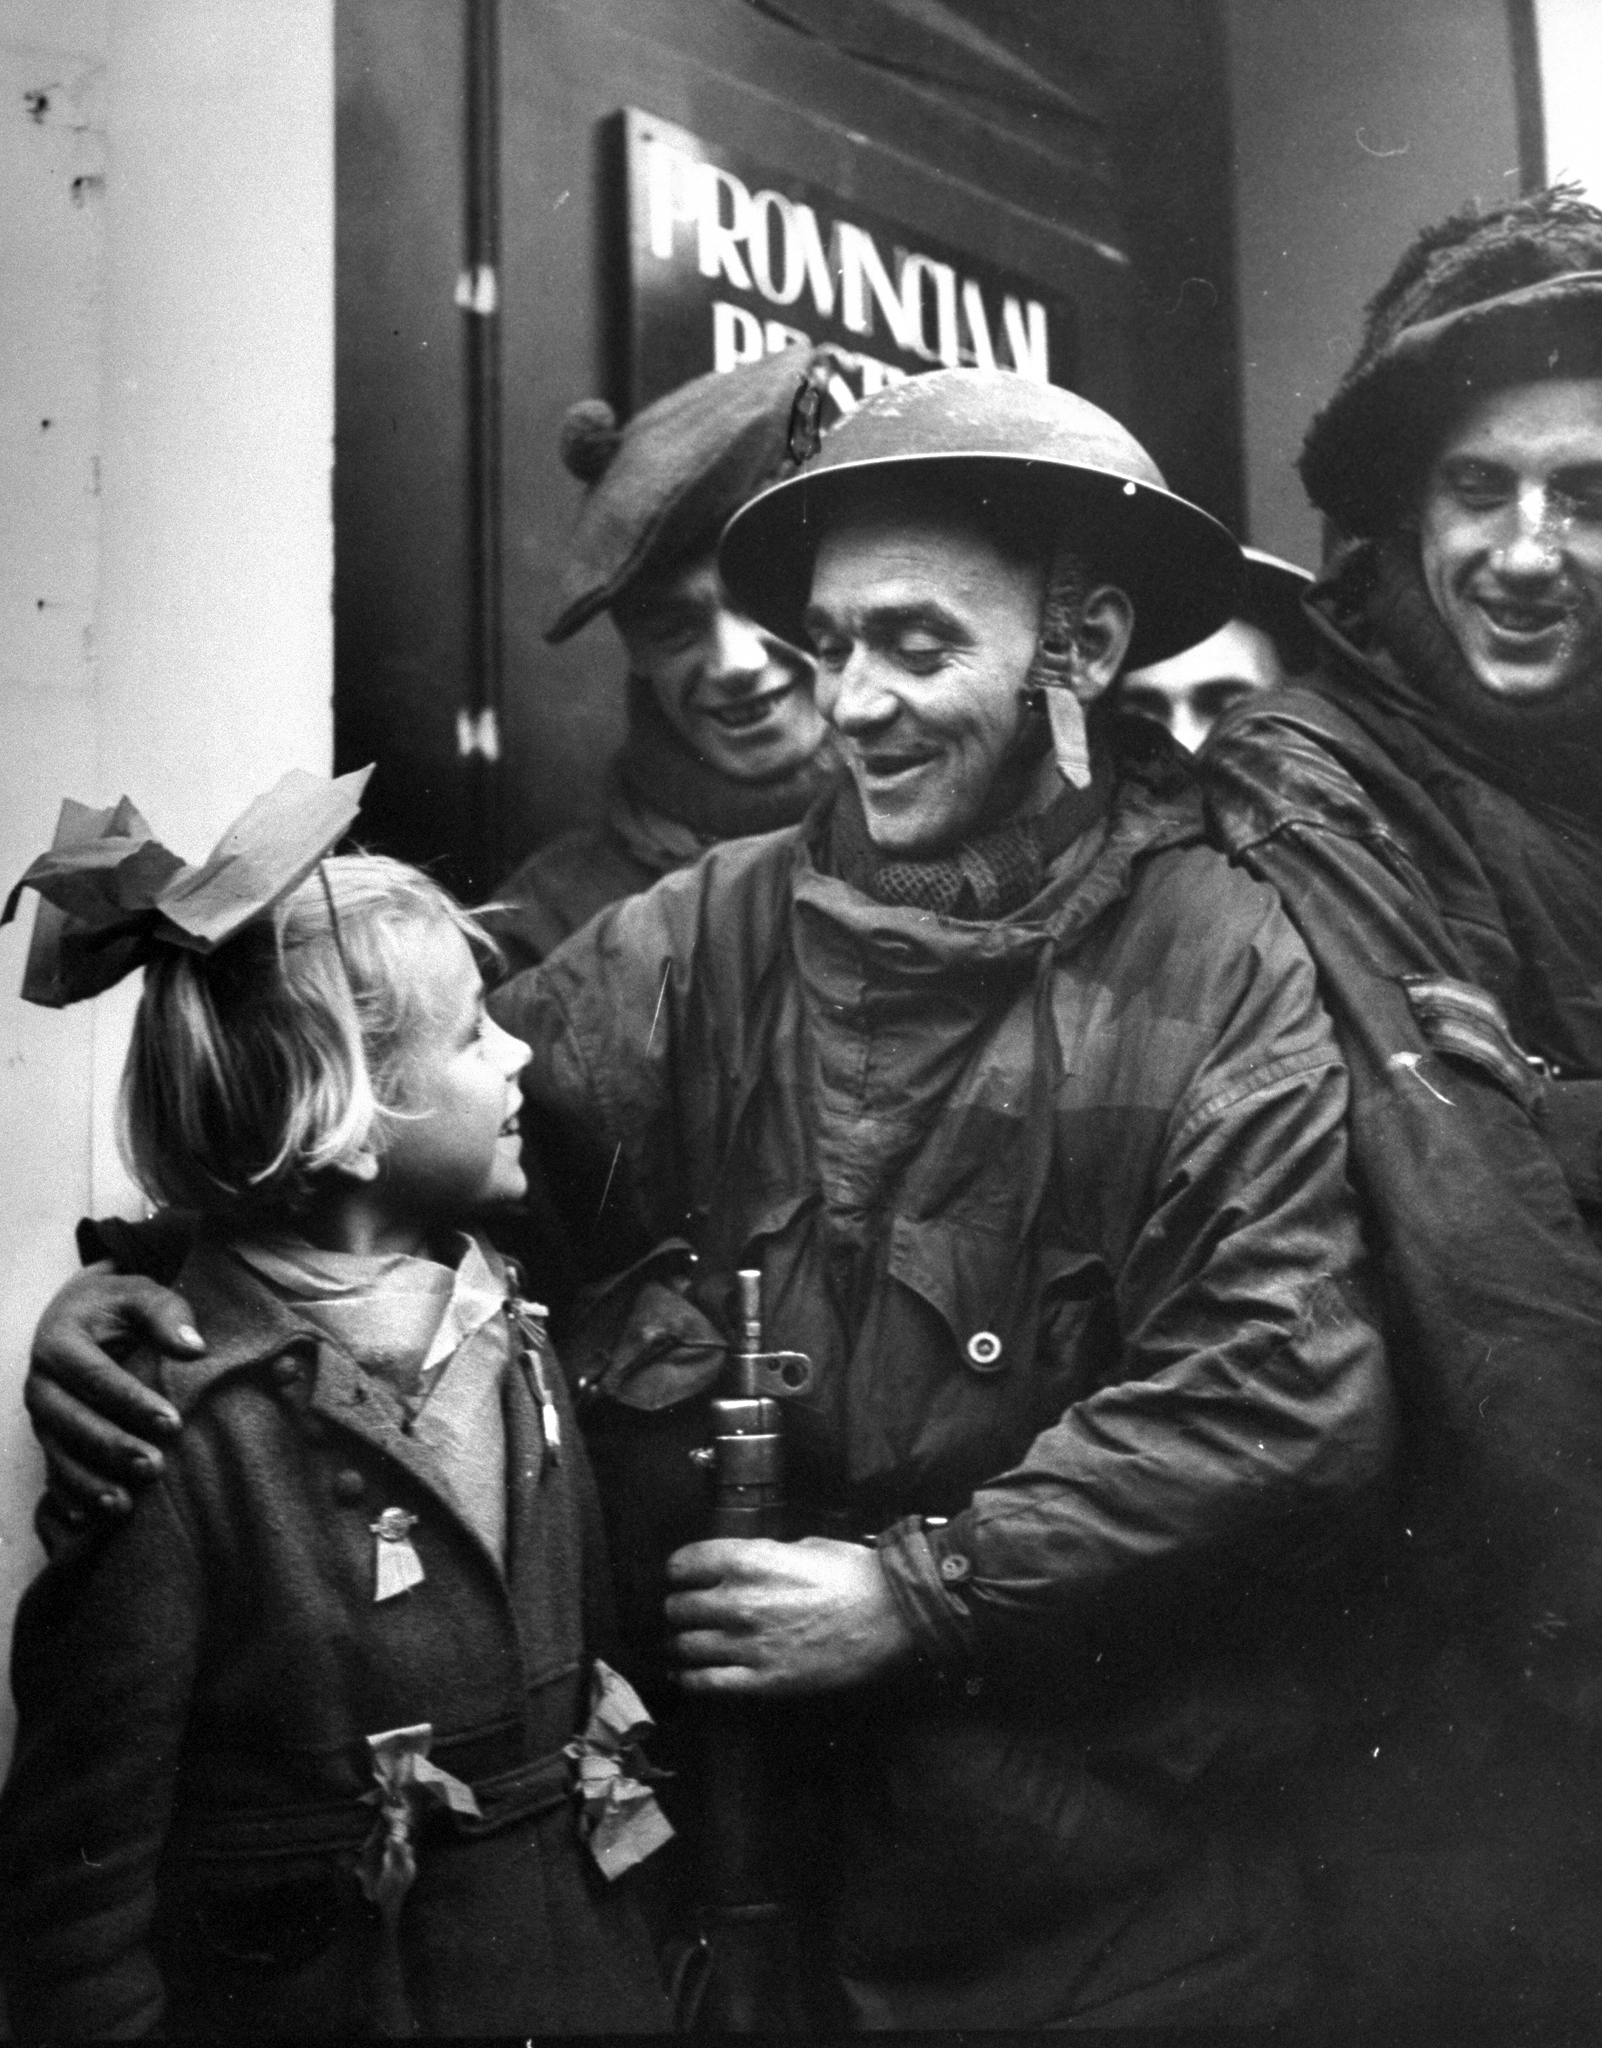 A Scotch tommy making friends with a little Dutch girl, 1944.